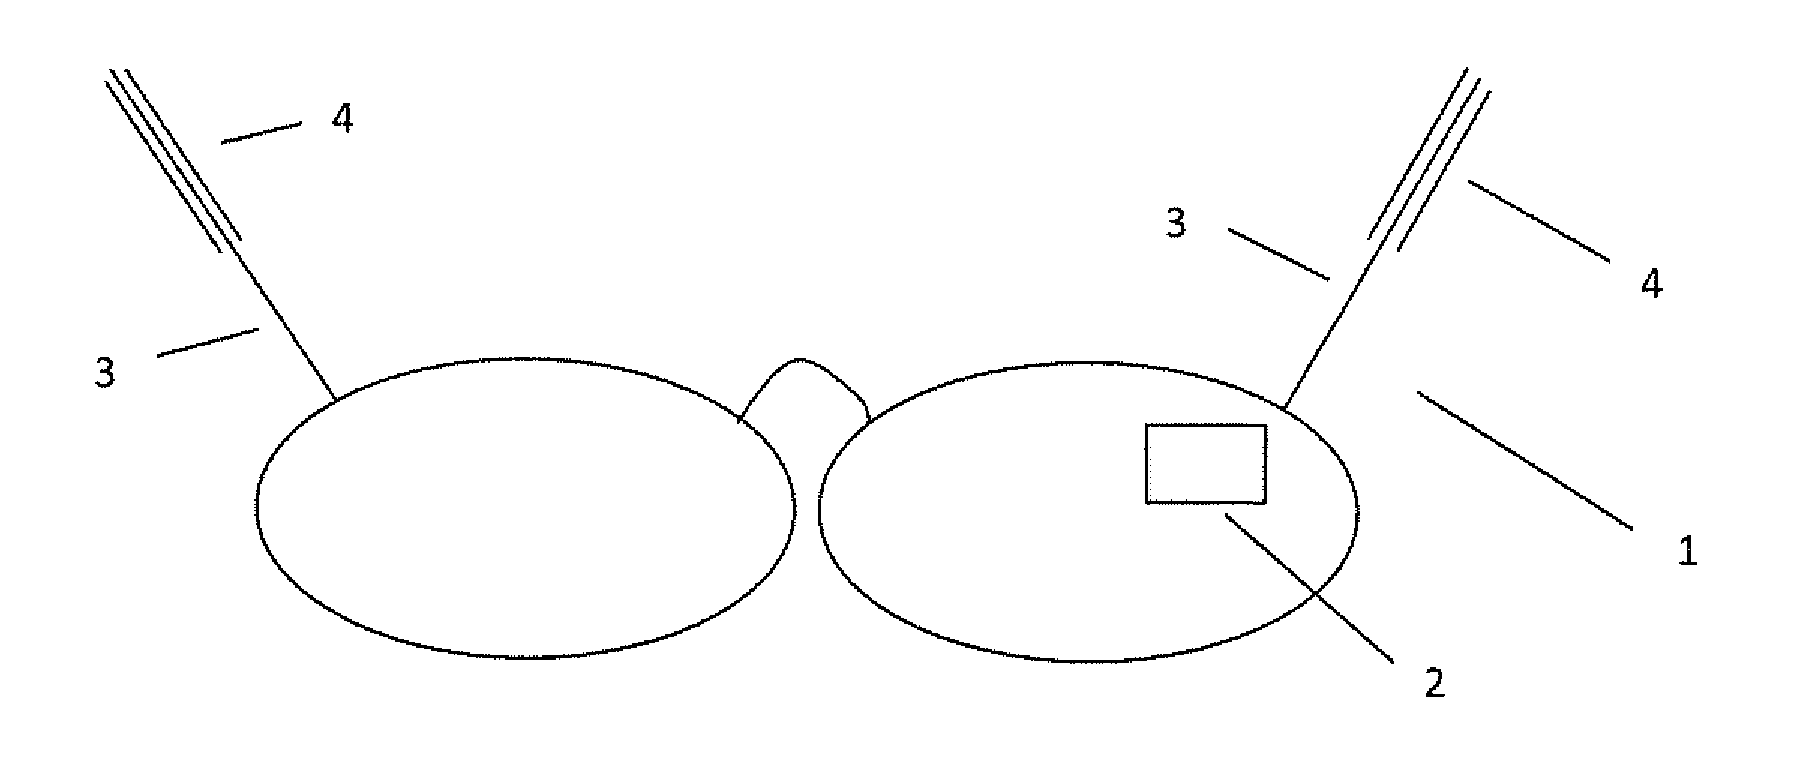 Method for Selecting an Information Source for Display on Smart Glasses